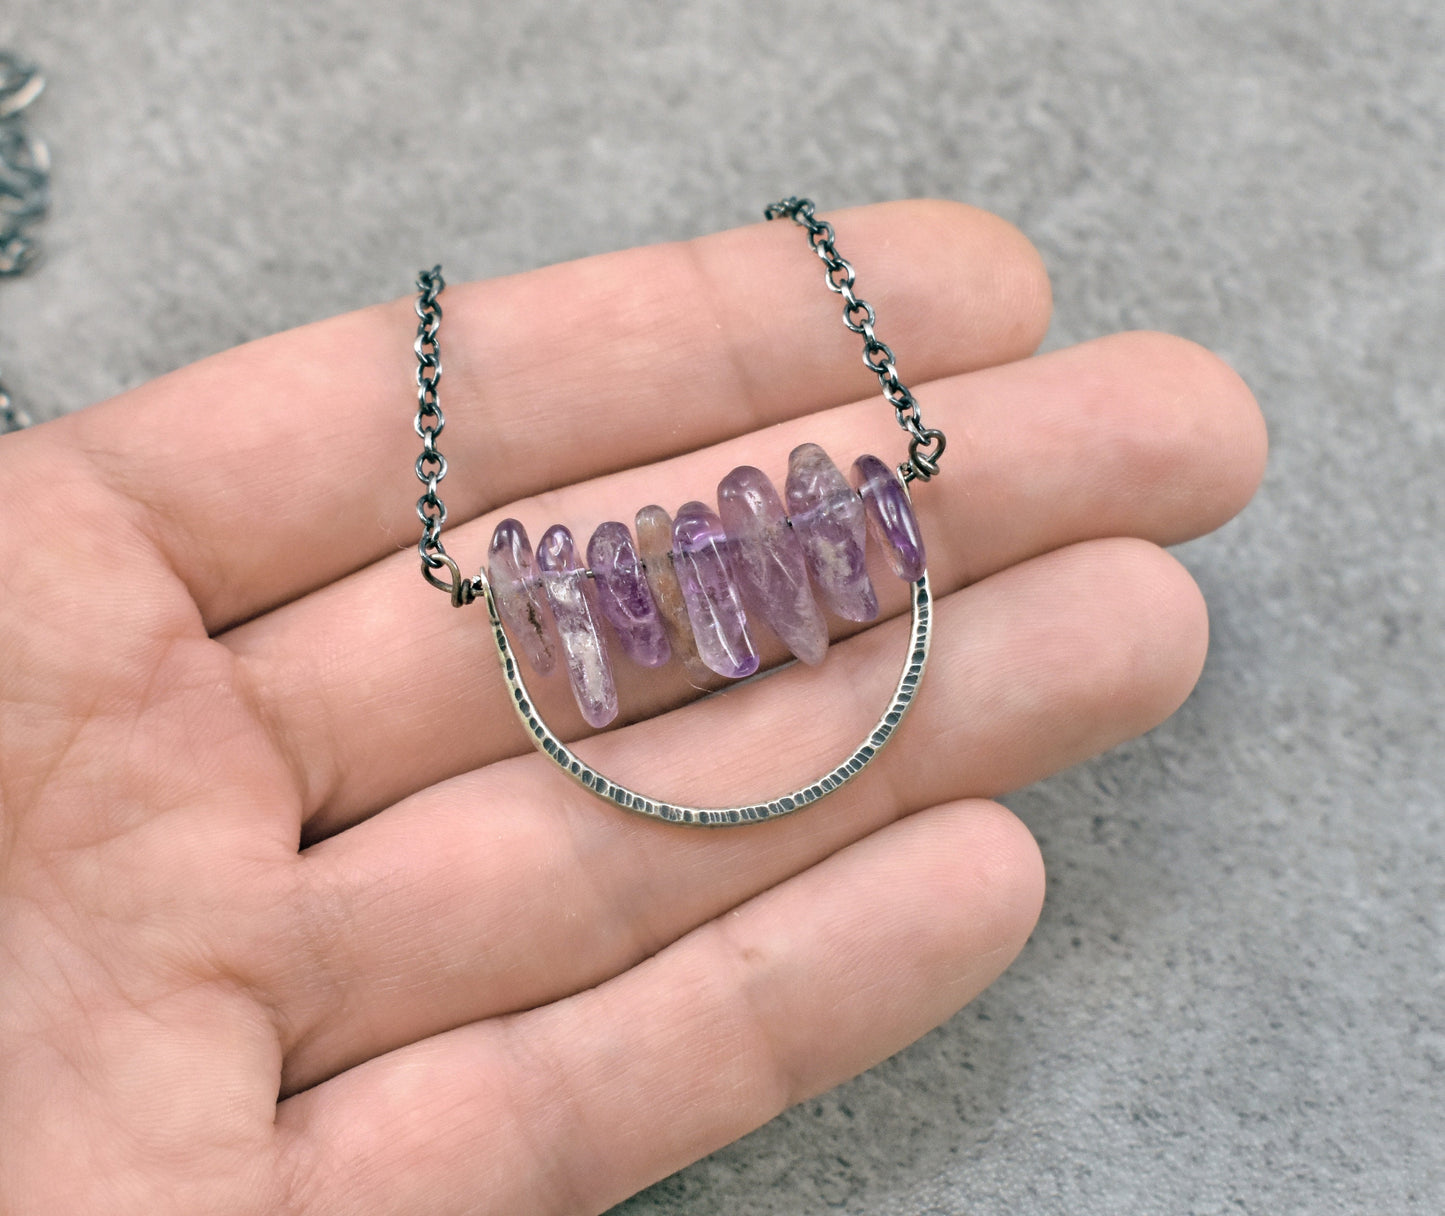 Super Seven Sterling Silver Necklace, Artisan Amethyst Jewelry Handmade, Rustic Purple Stone Pendant, Melody Stone, Unique Crystal